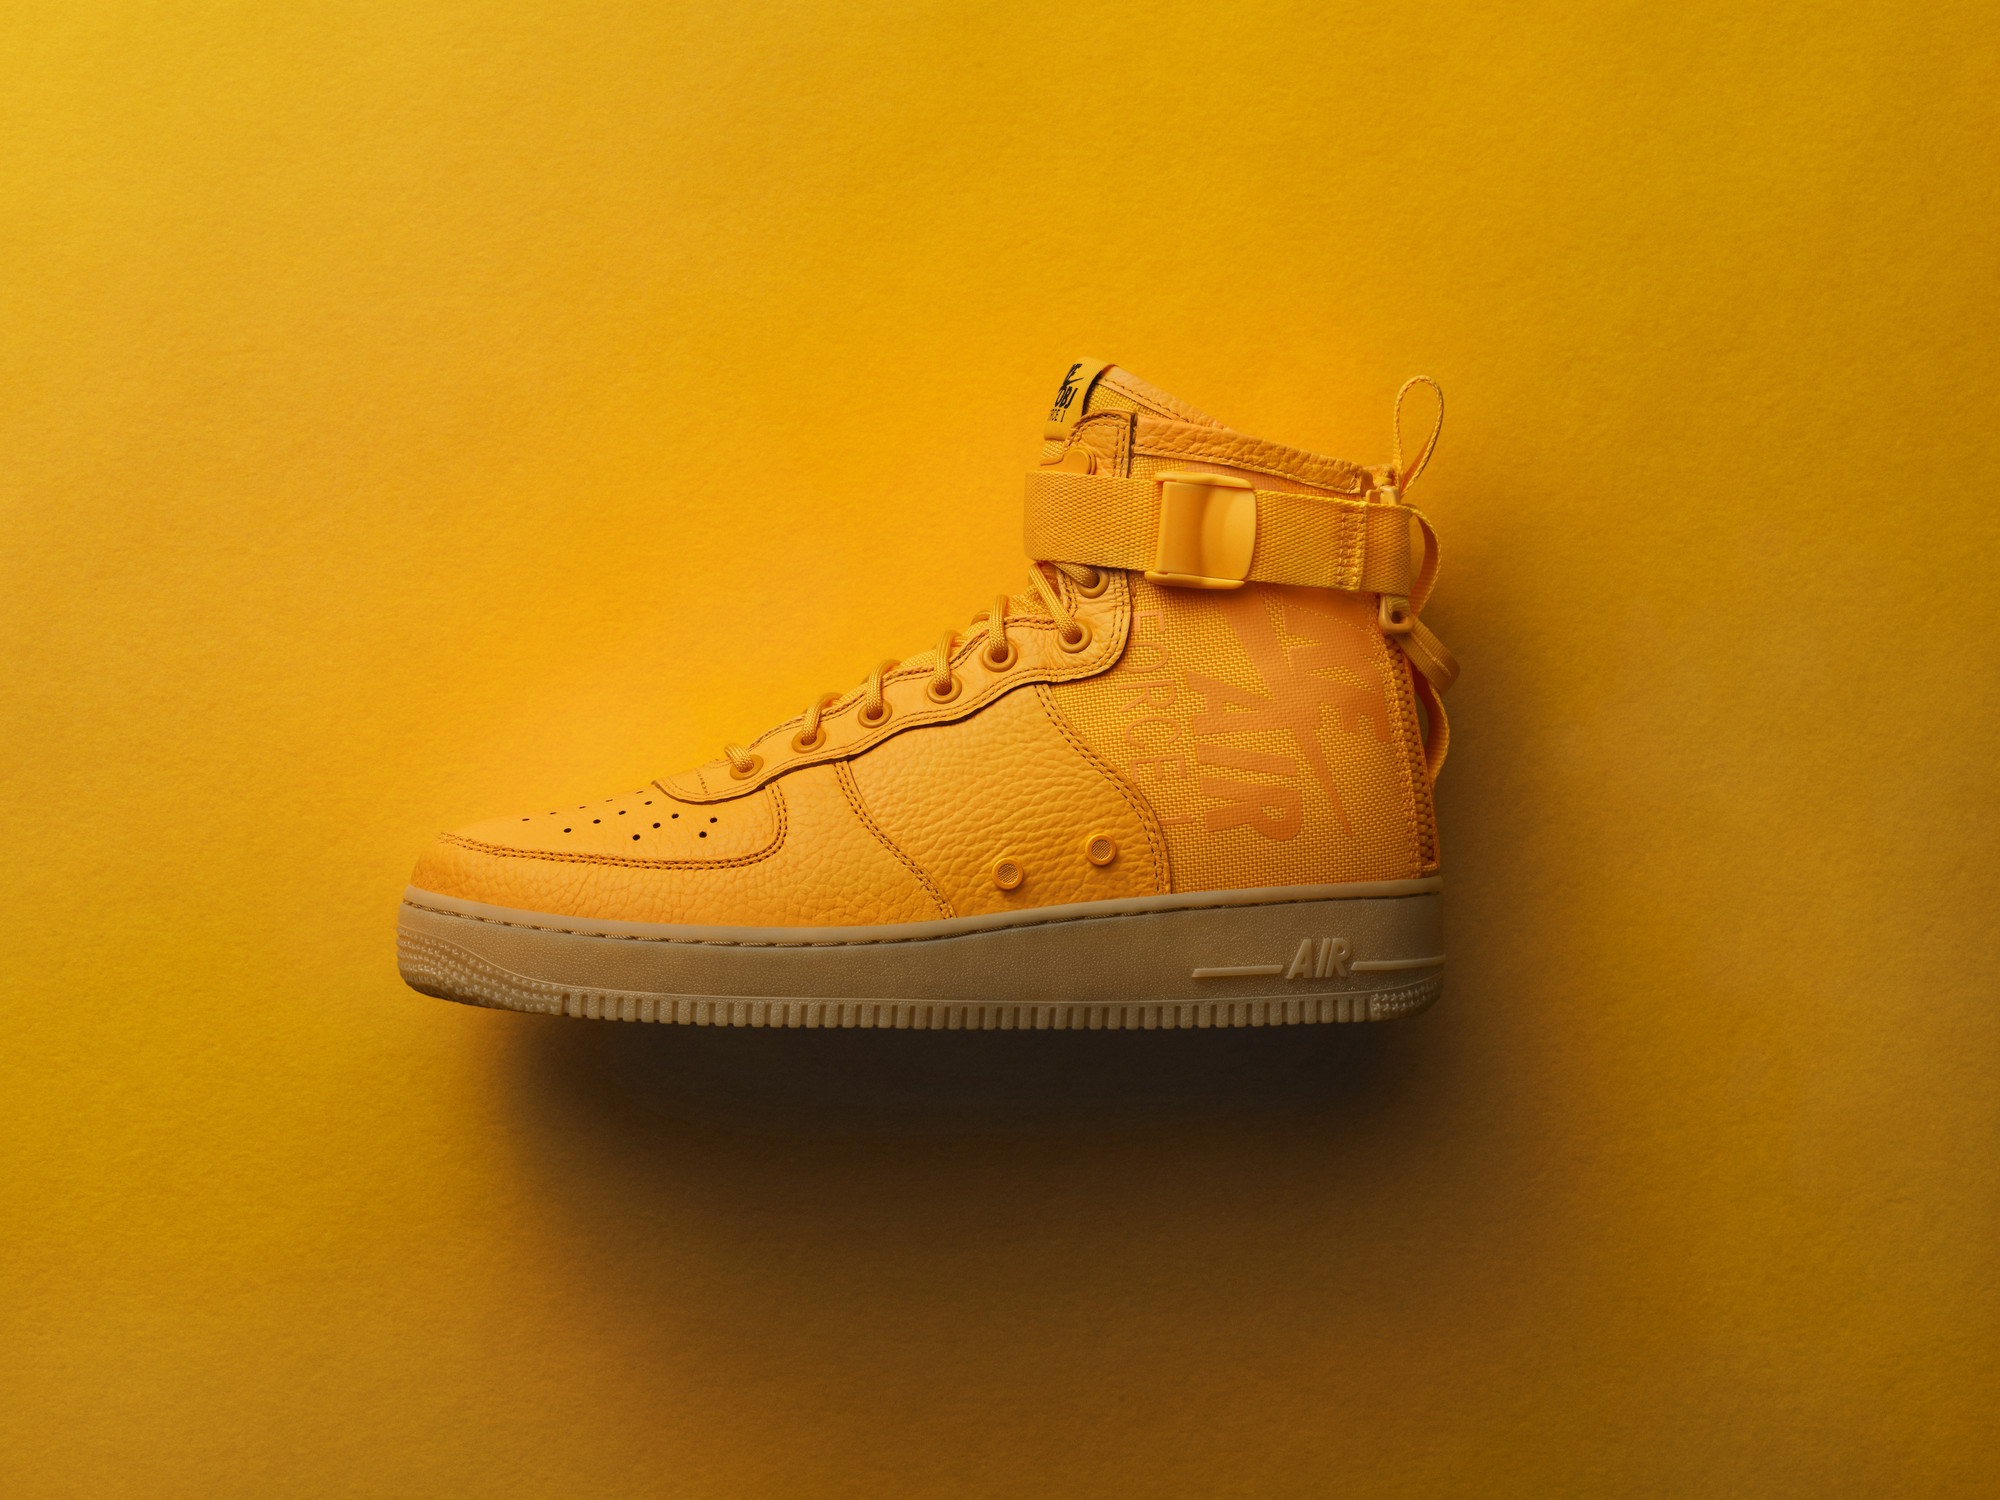 Lifestyle Shoe is an SF AF1 Mid 